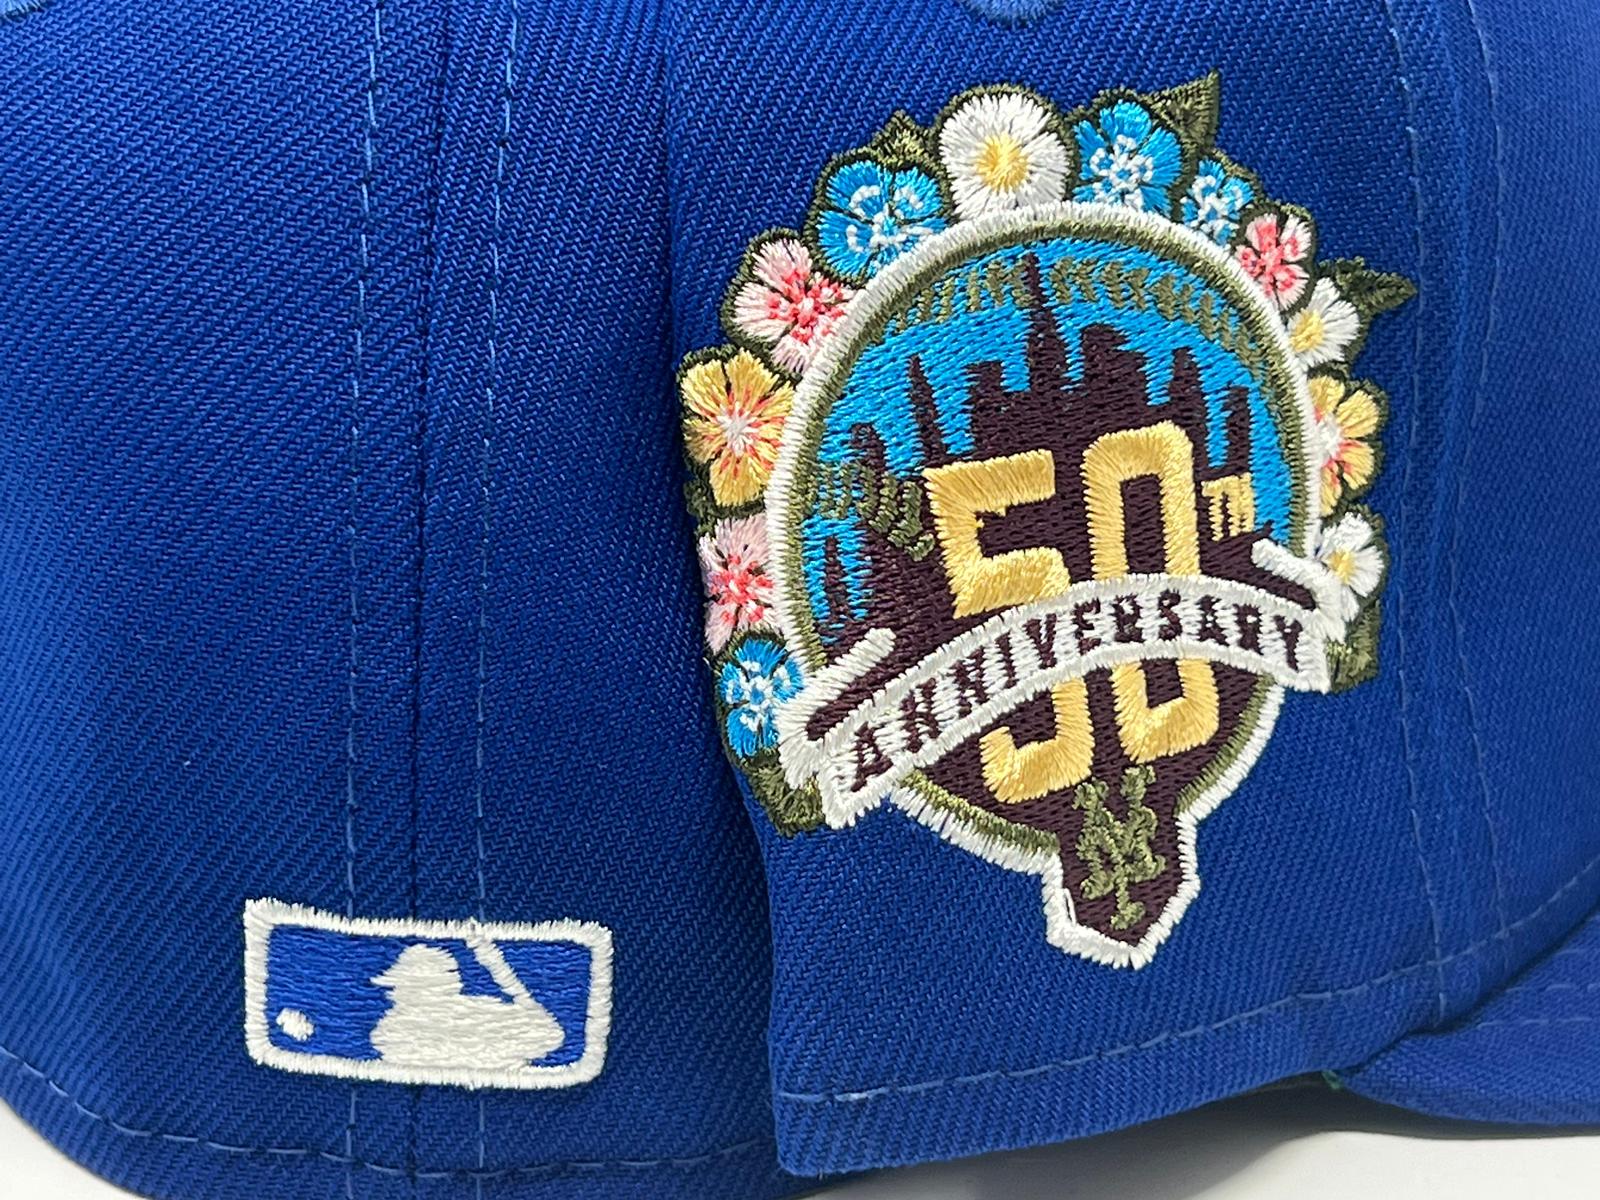 New York Mets 50th Anniversary Patch